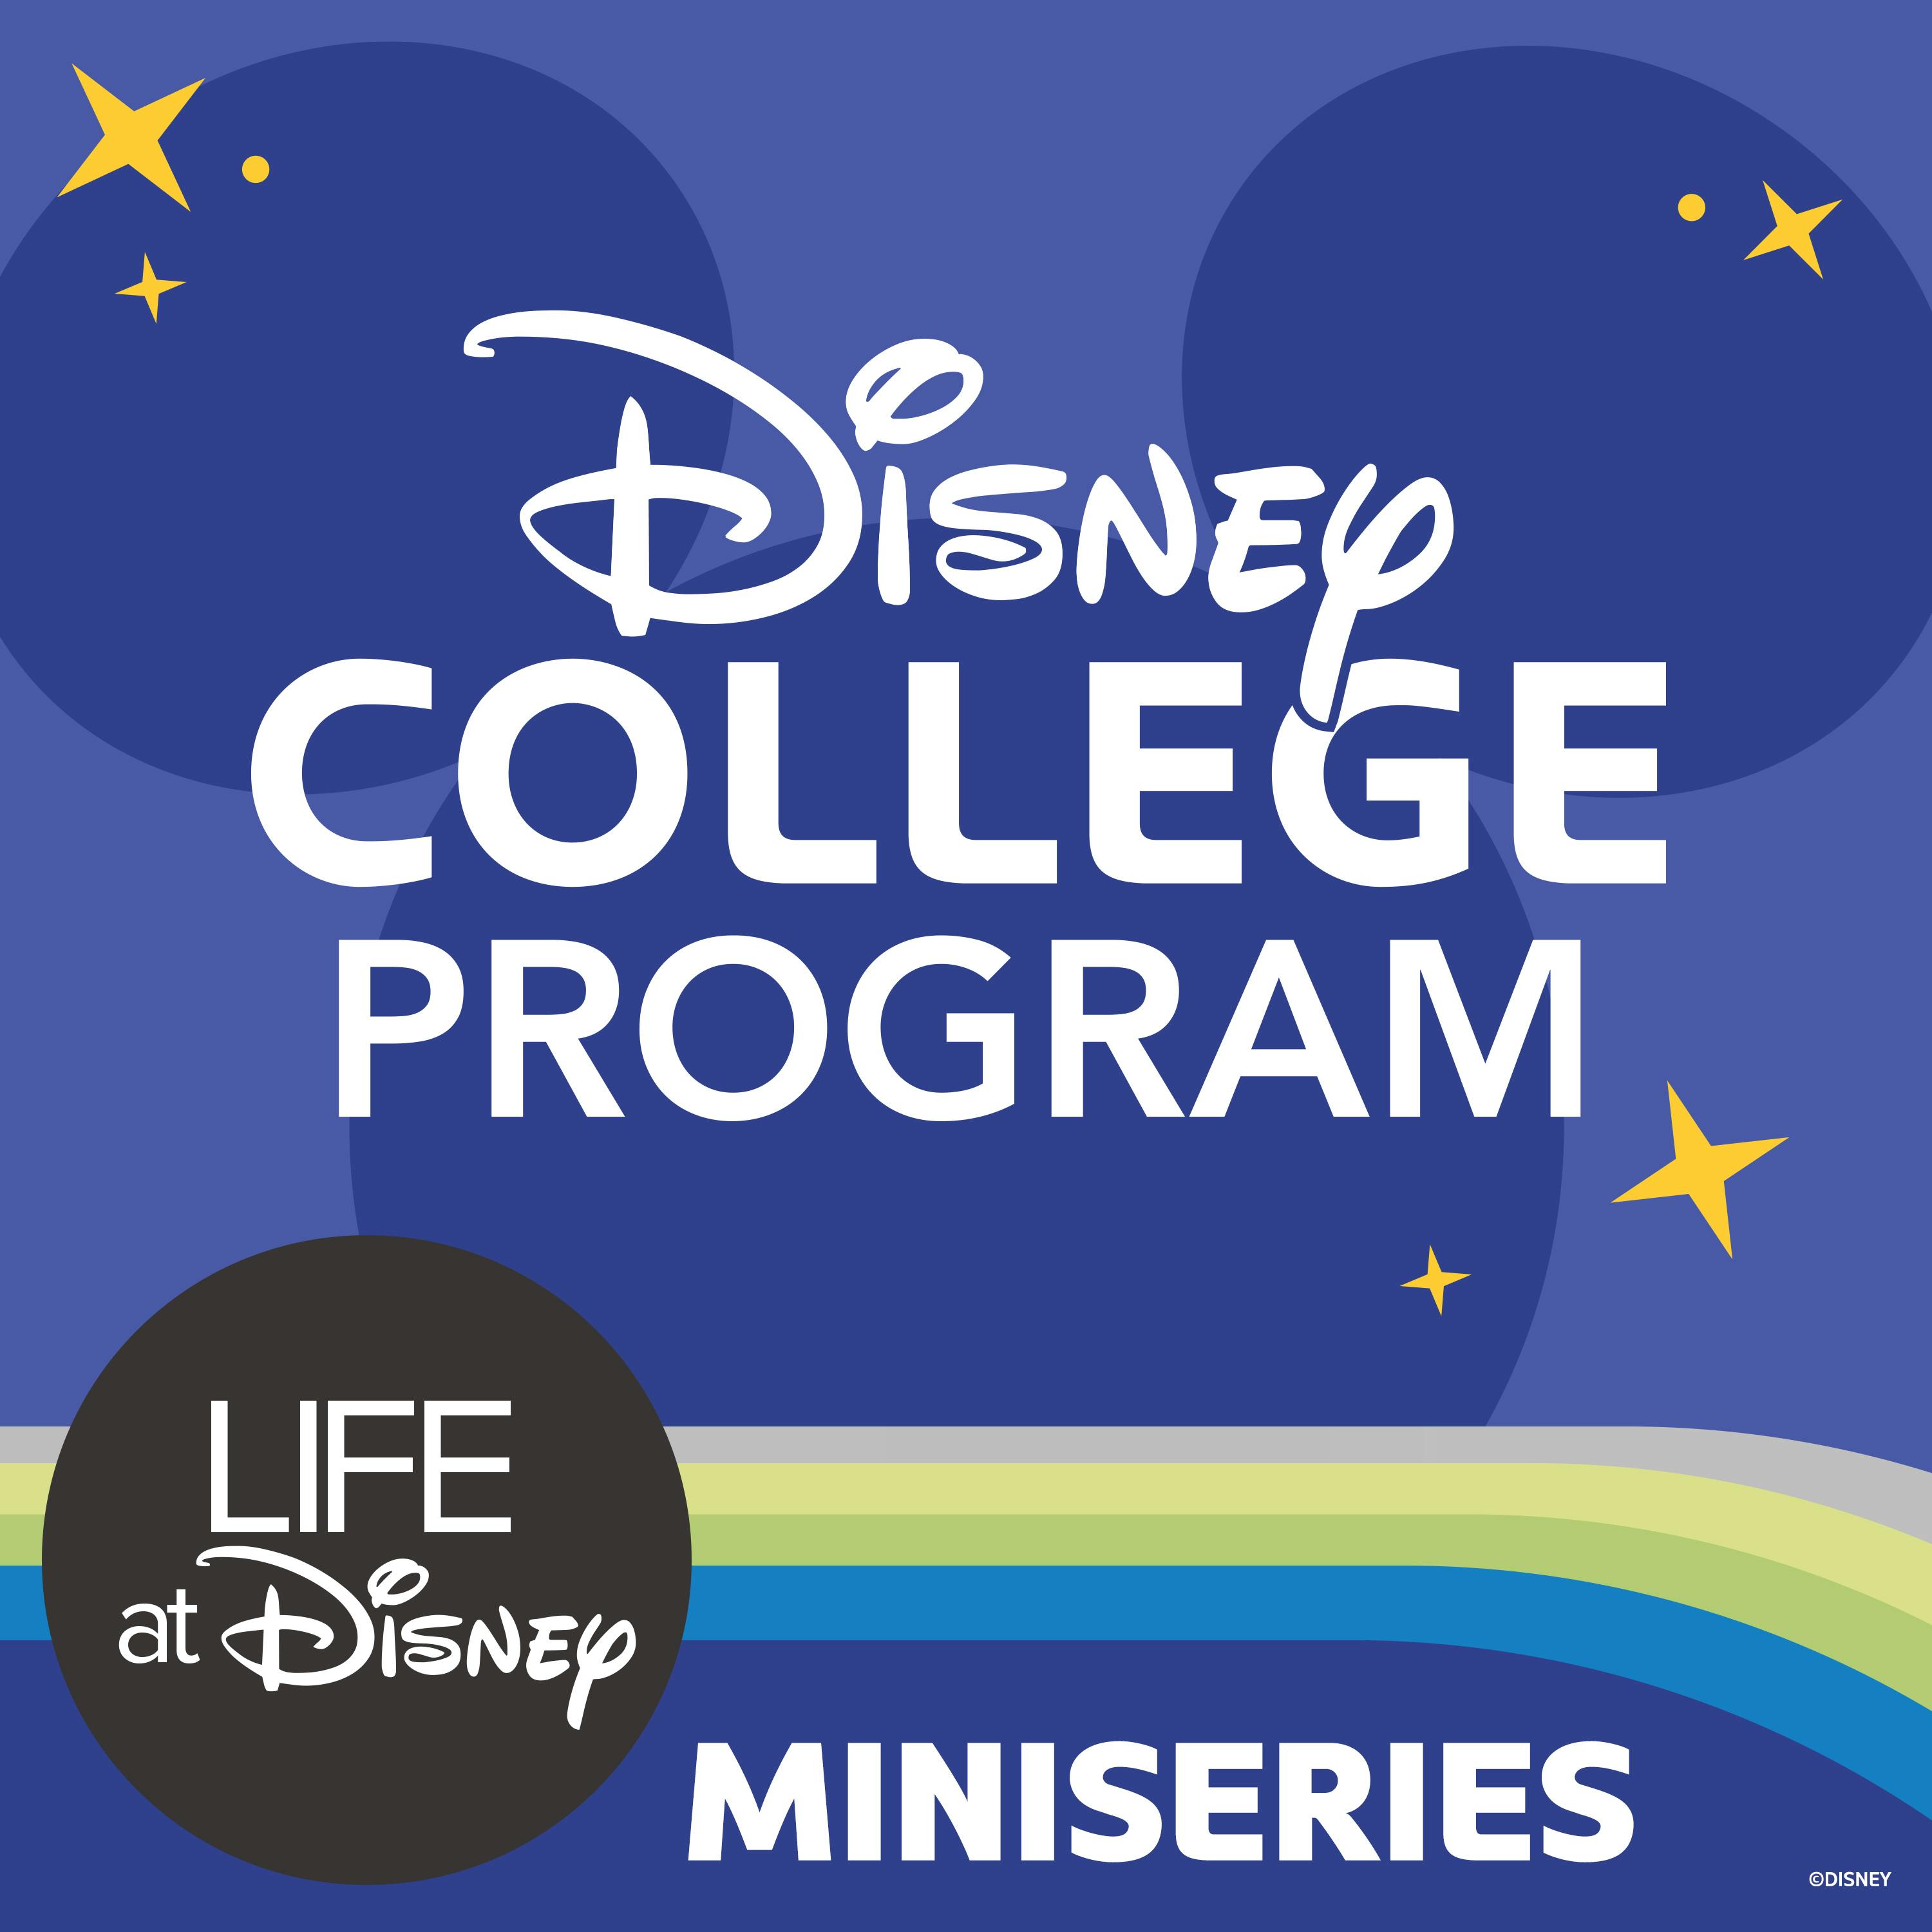 DCP MINISERIES 2 - Advice from a Disney College Program Recruiter